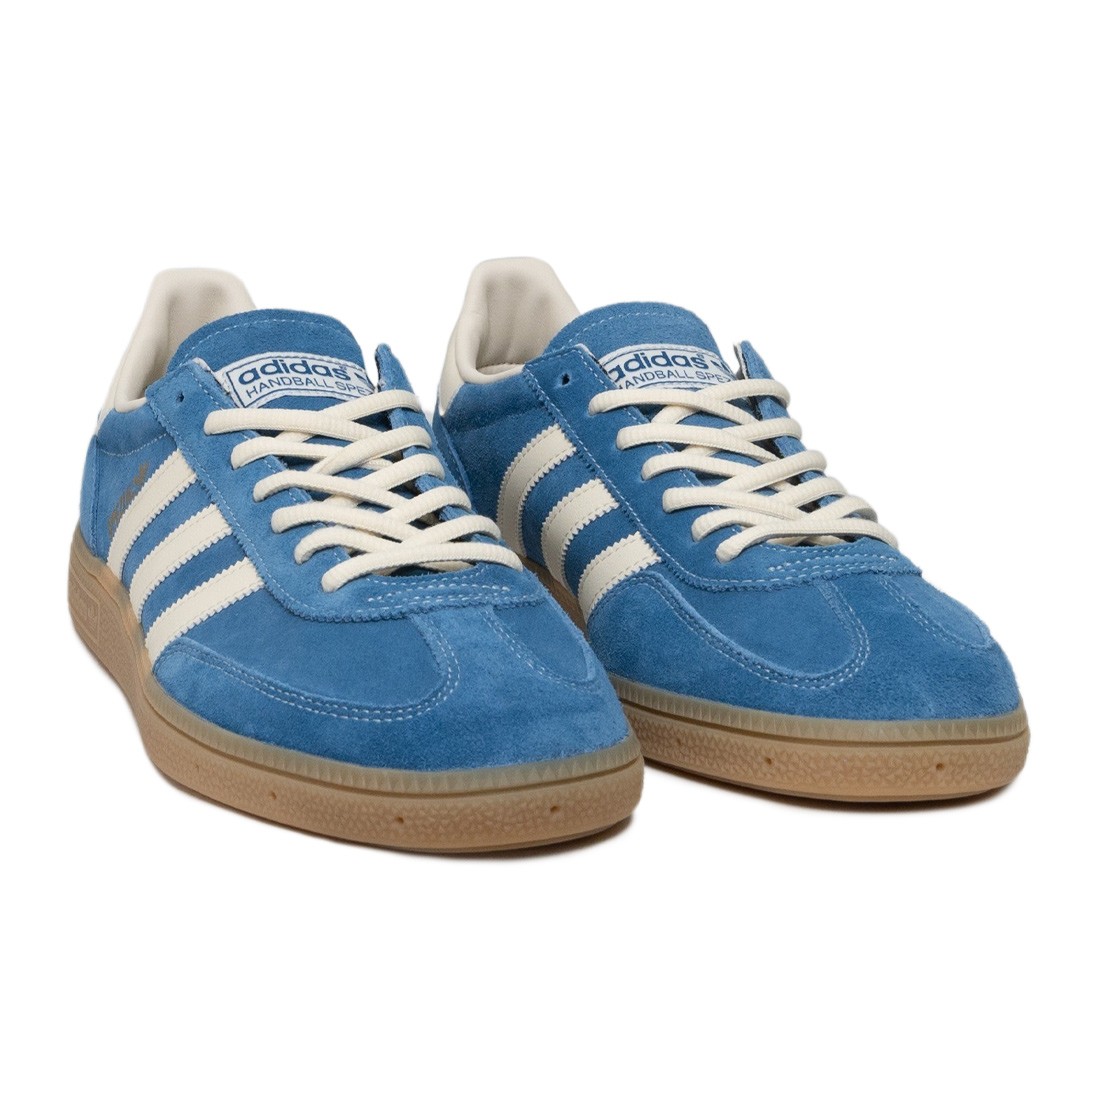 The tooling features SKATEBOARDING adidas old